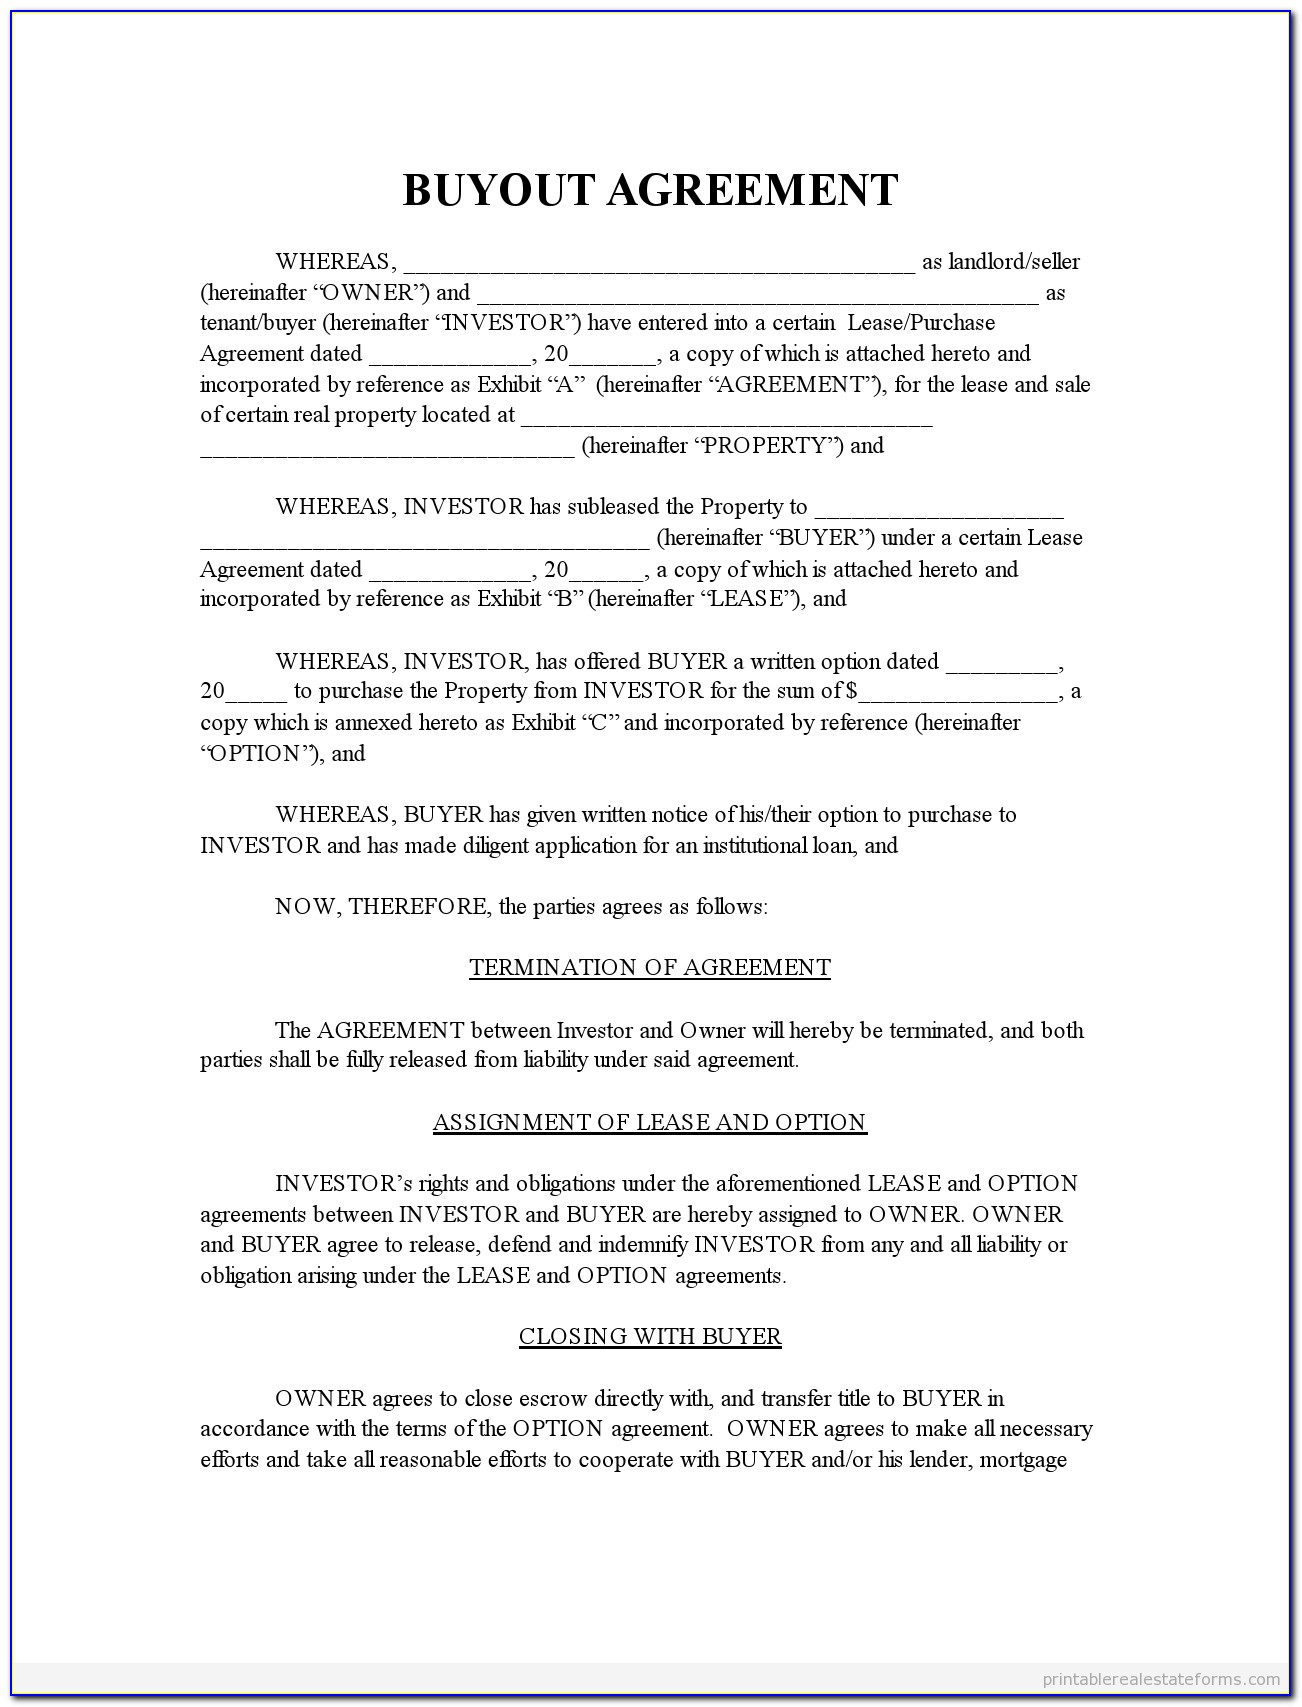 Simple Partnership Buyout Agreement Template